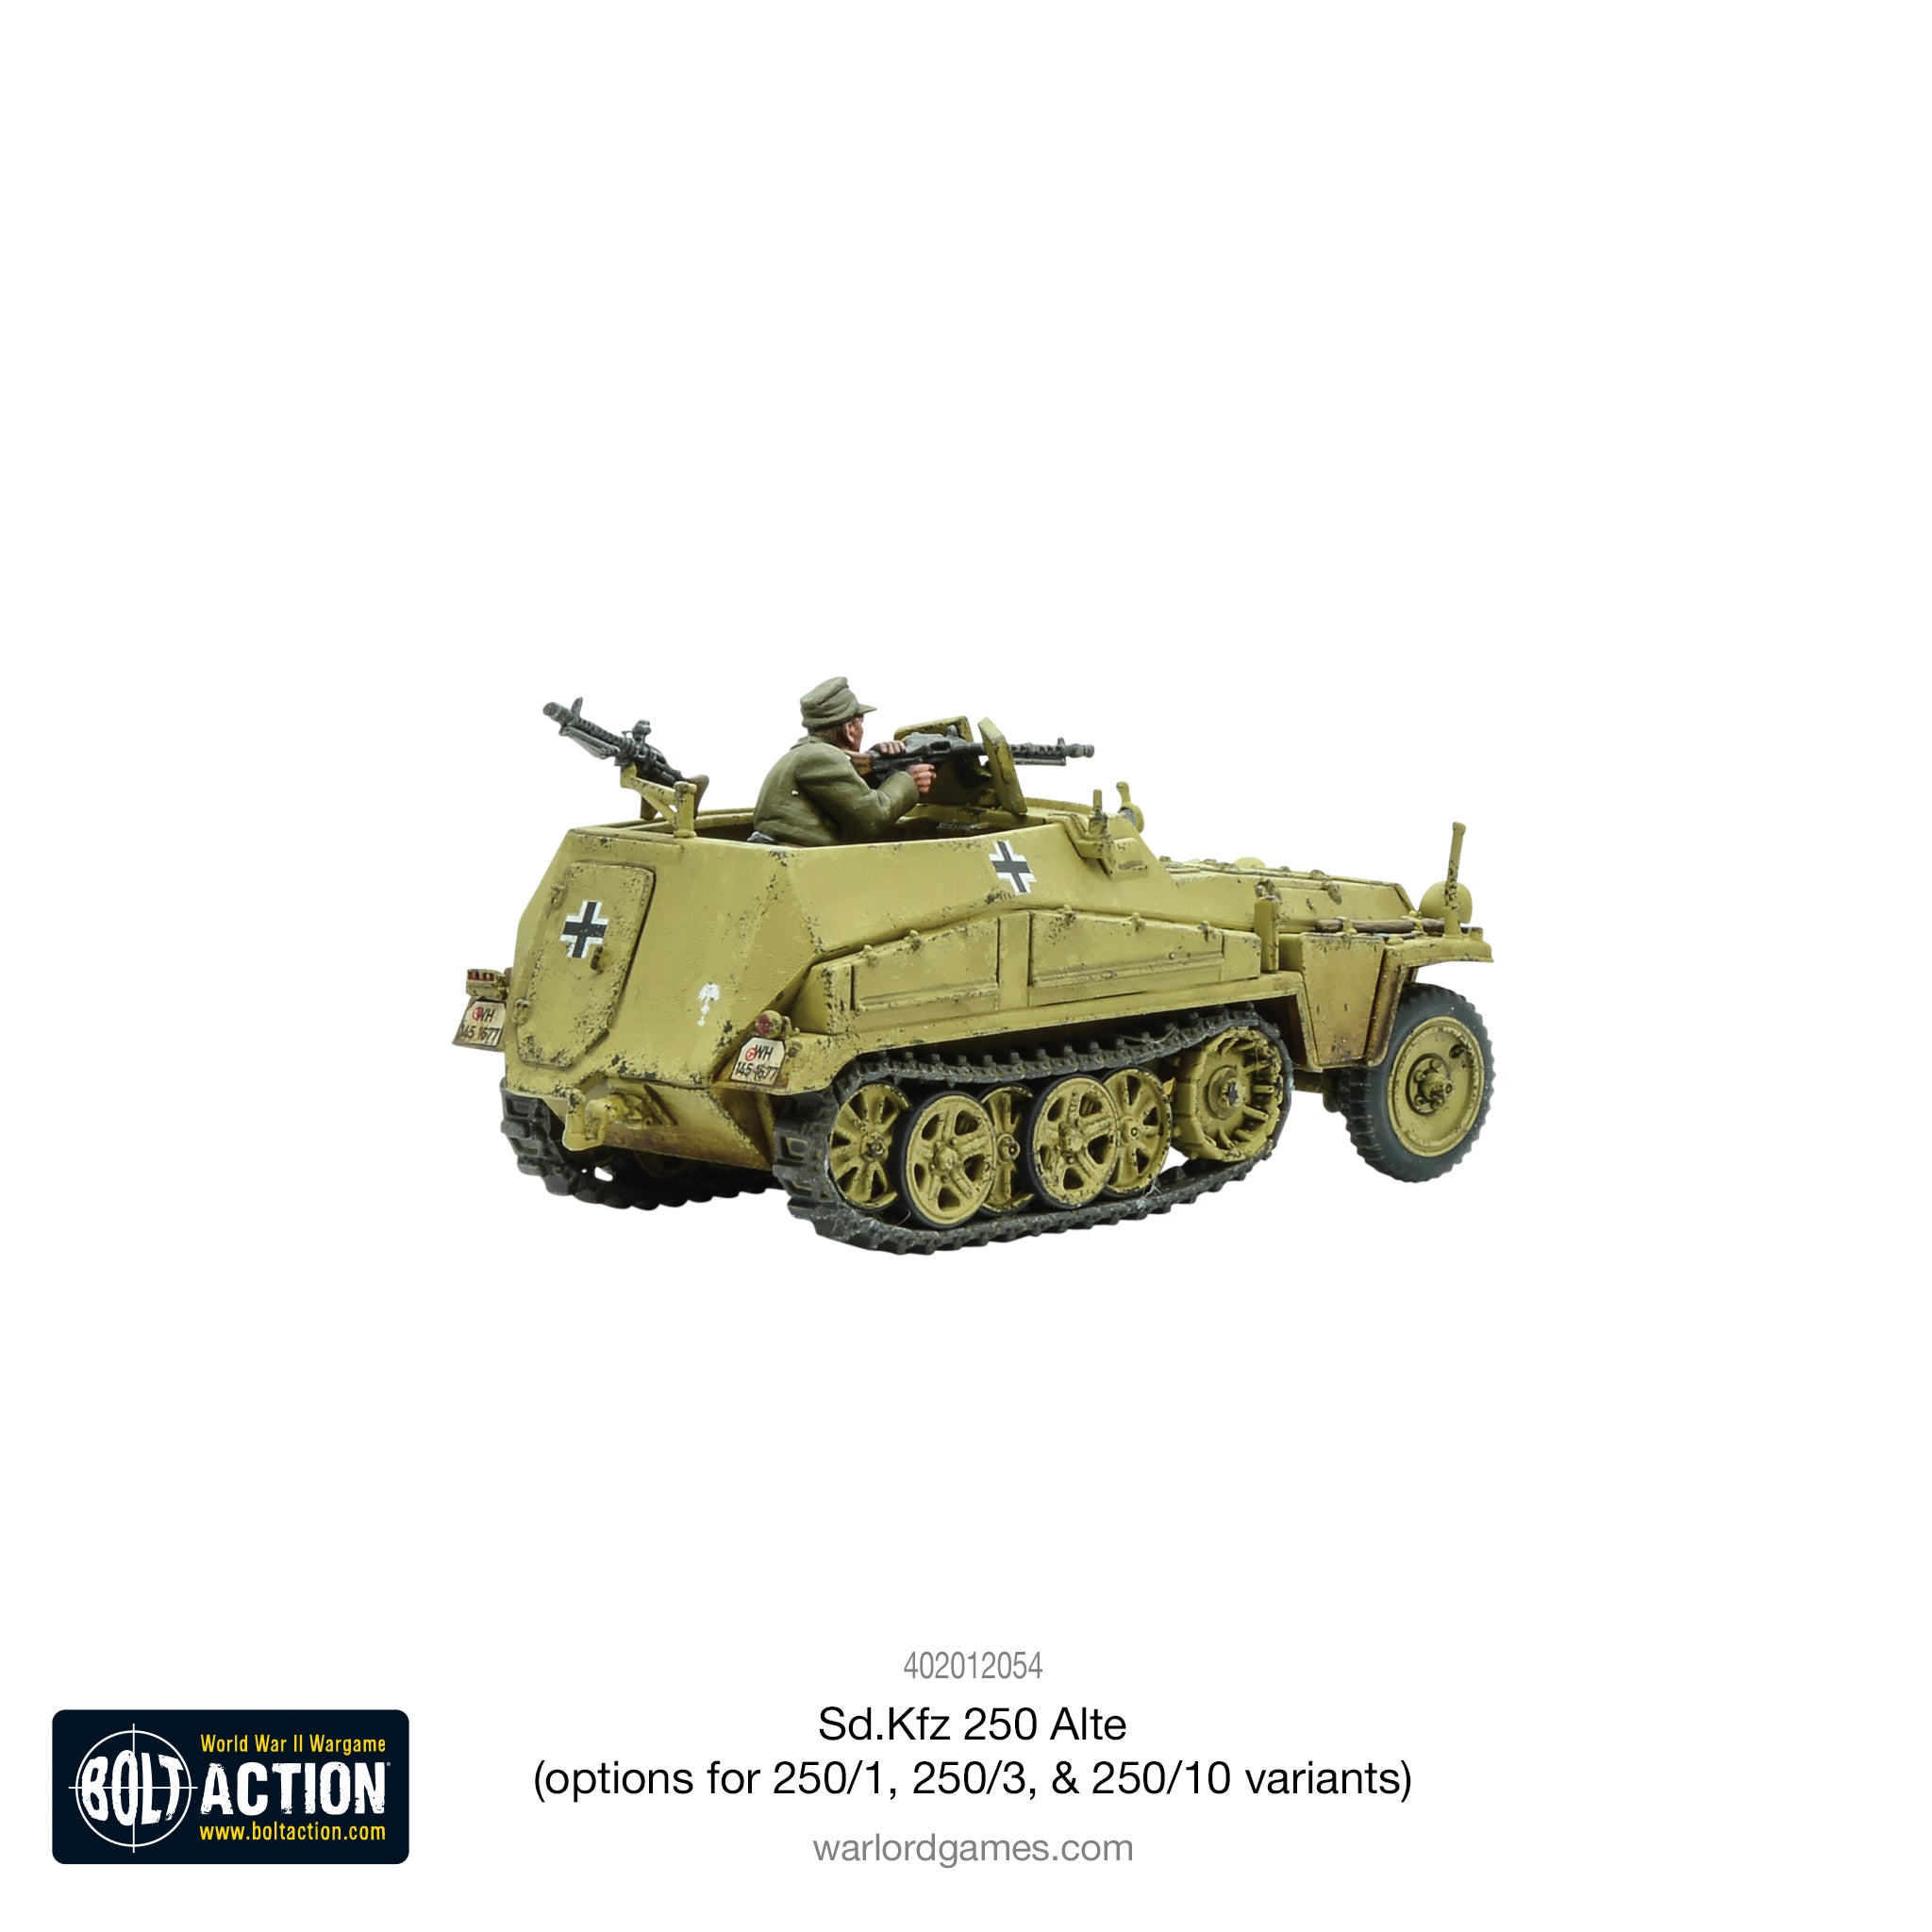 Sd.Kfz 250 (Alte) half-track (options to make 250/1, 250/3 or 250/10 variants)